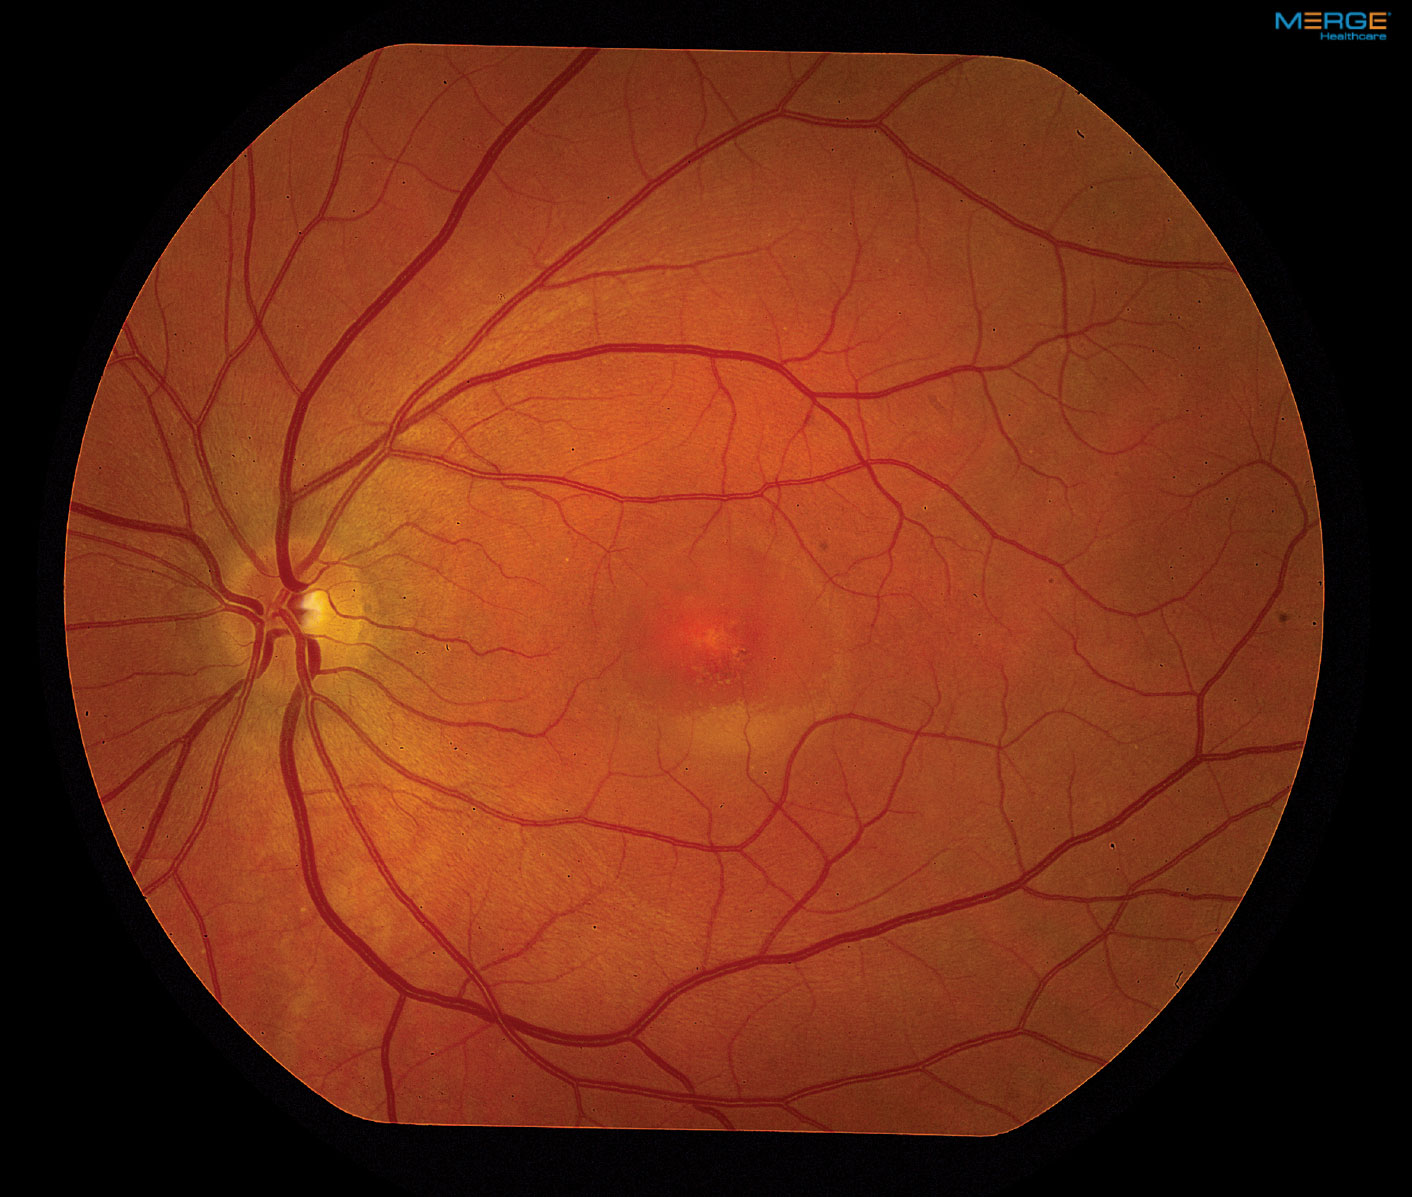 An 18-year-old man with dominant optic atrophy (DOA). The fundus